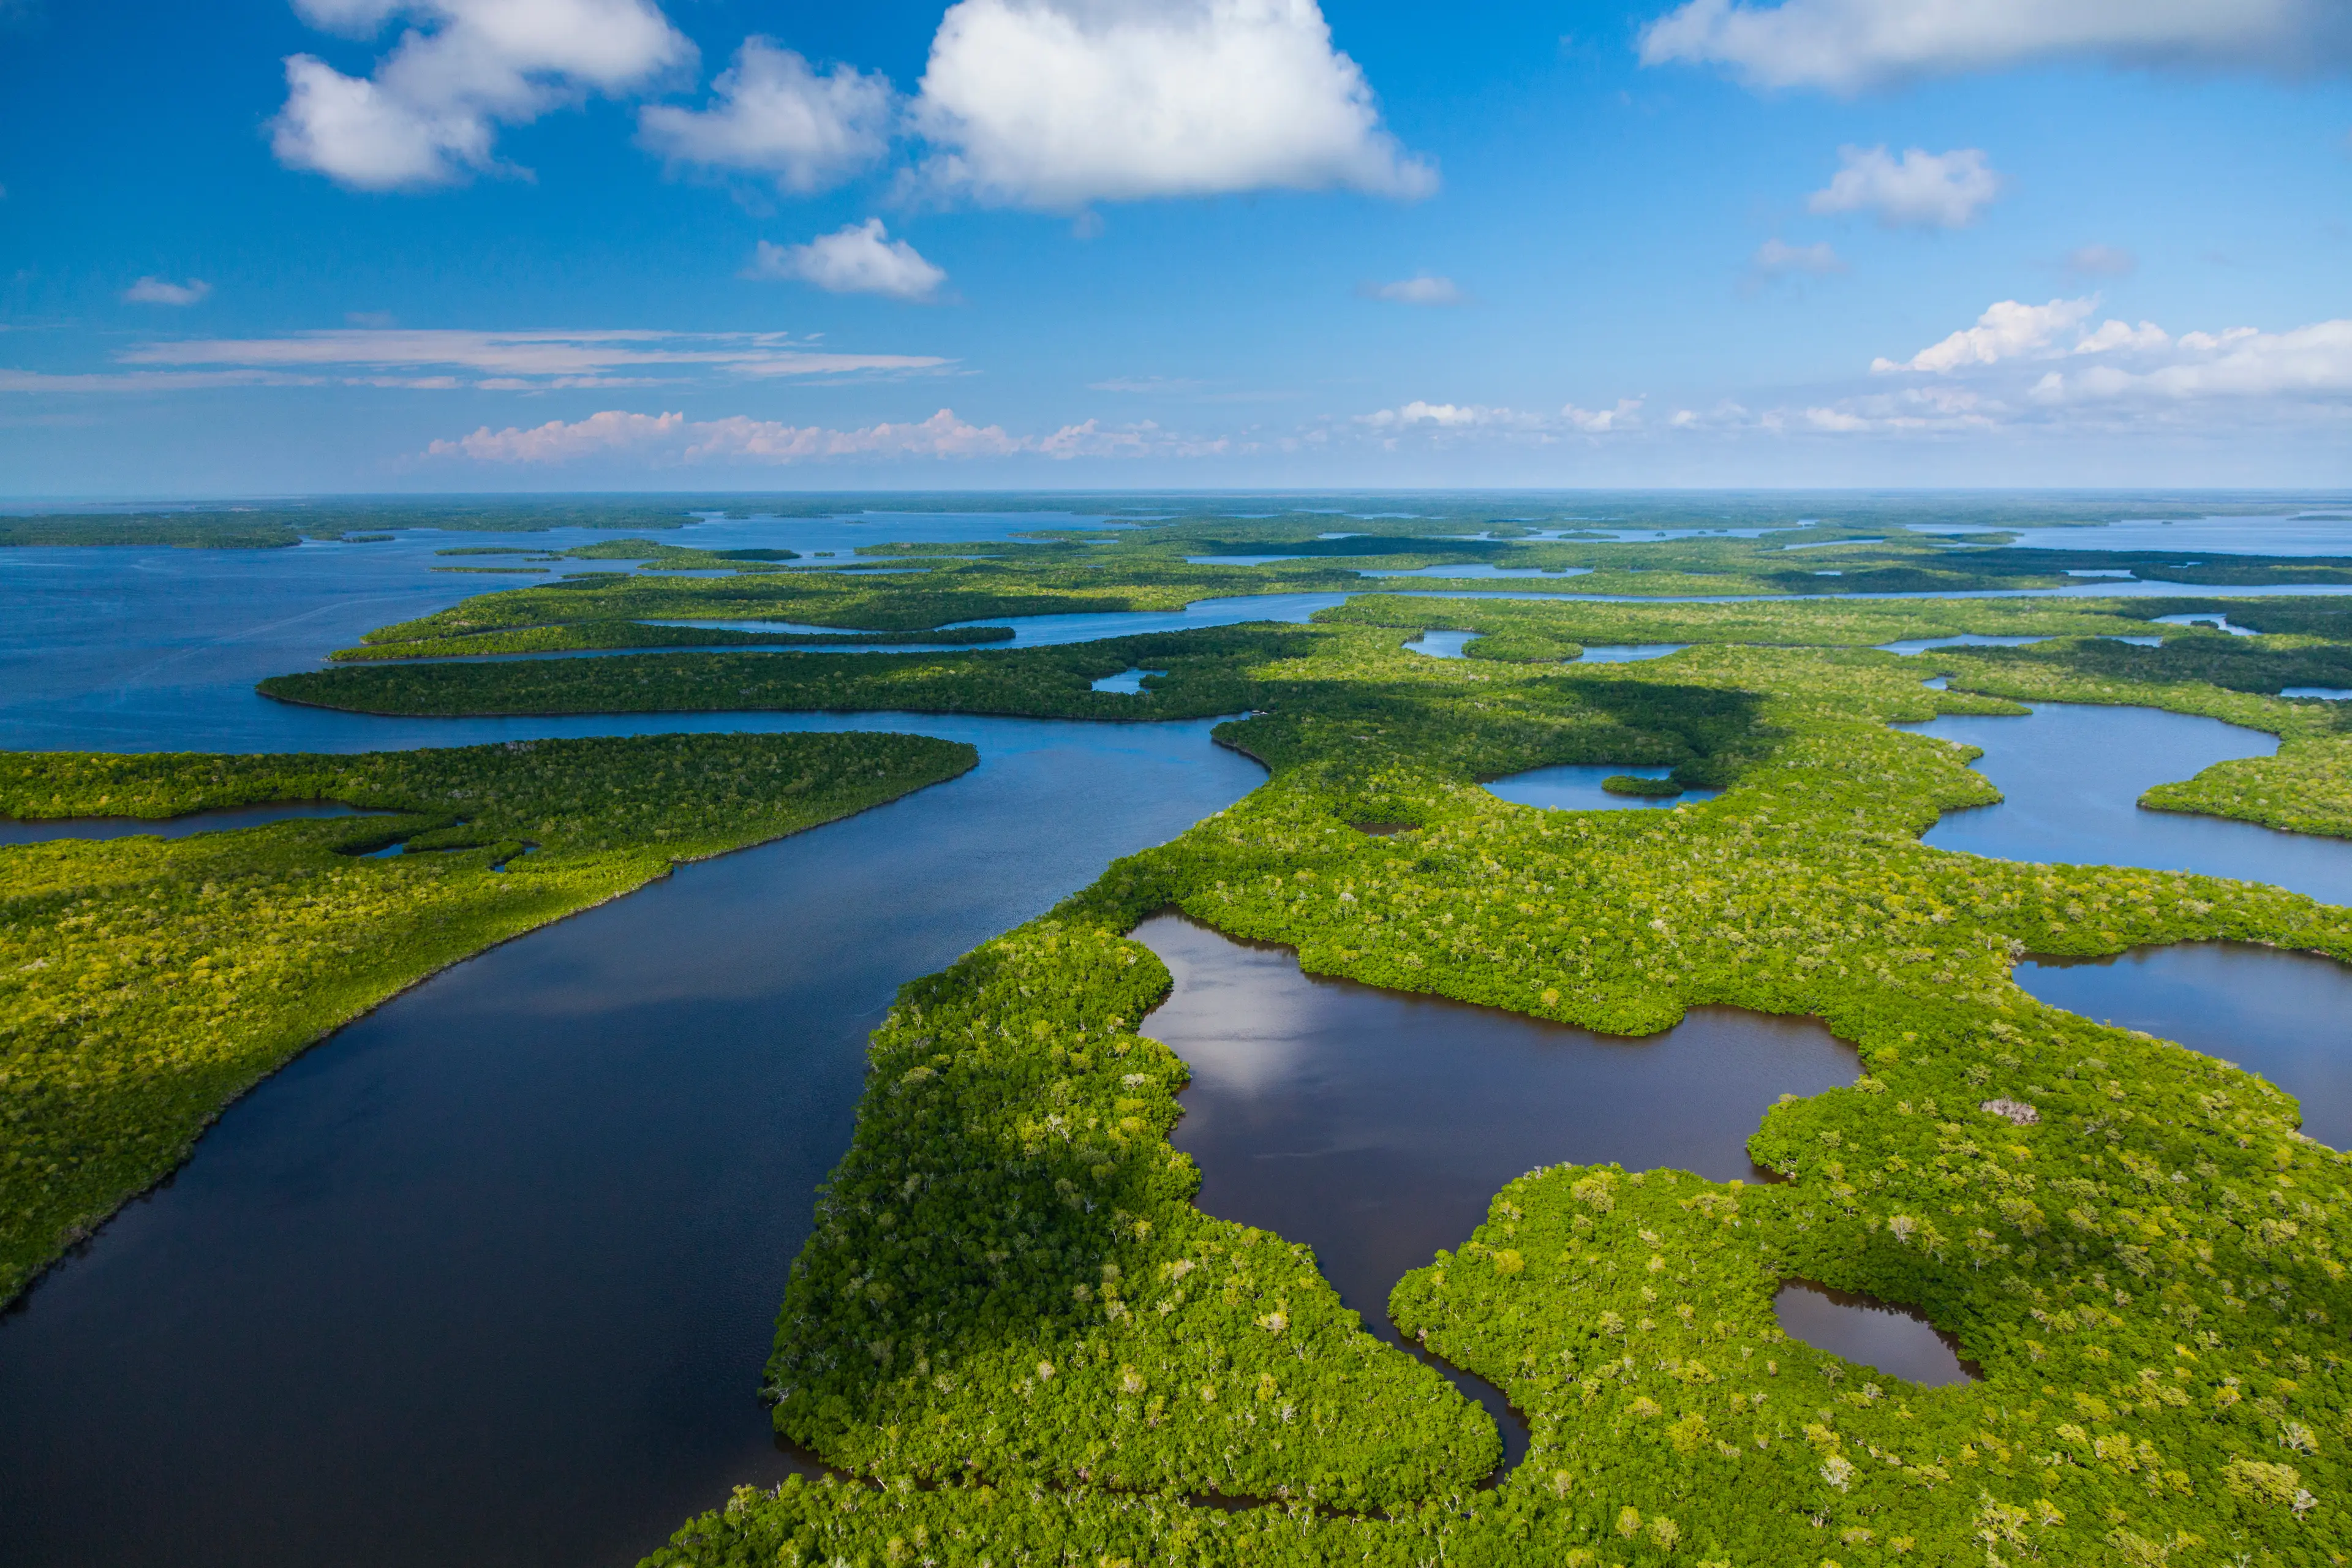 Aerial view of the Everglades National Park